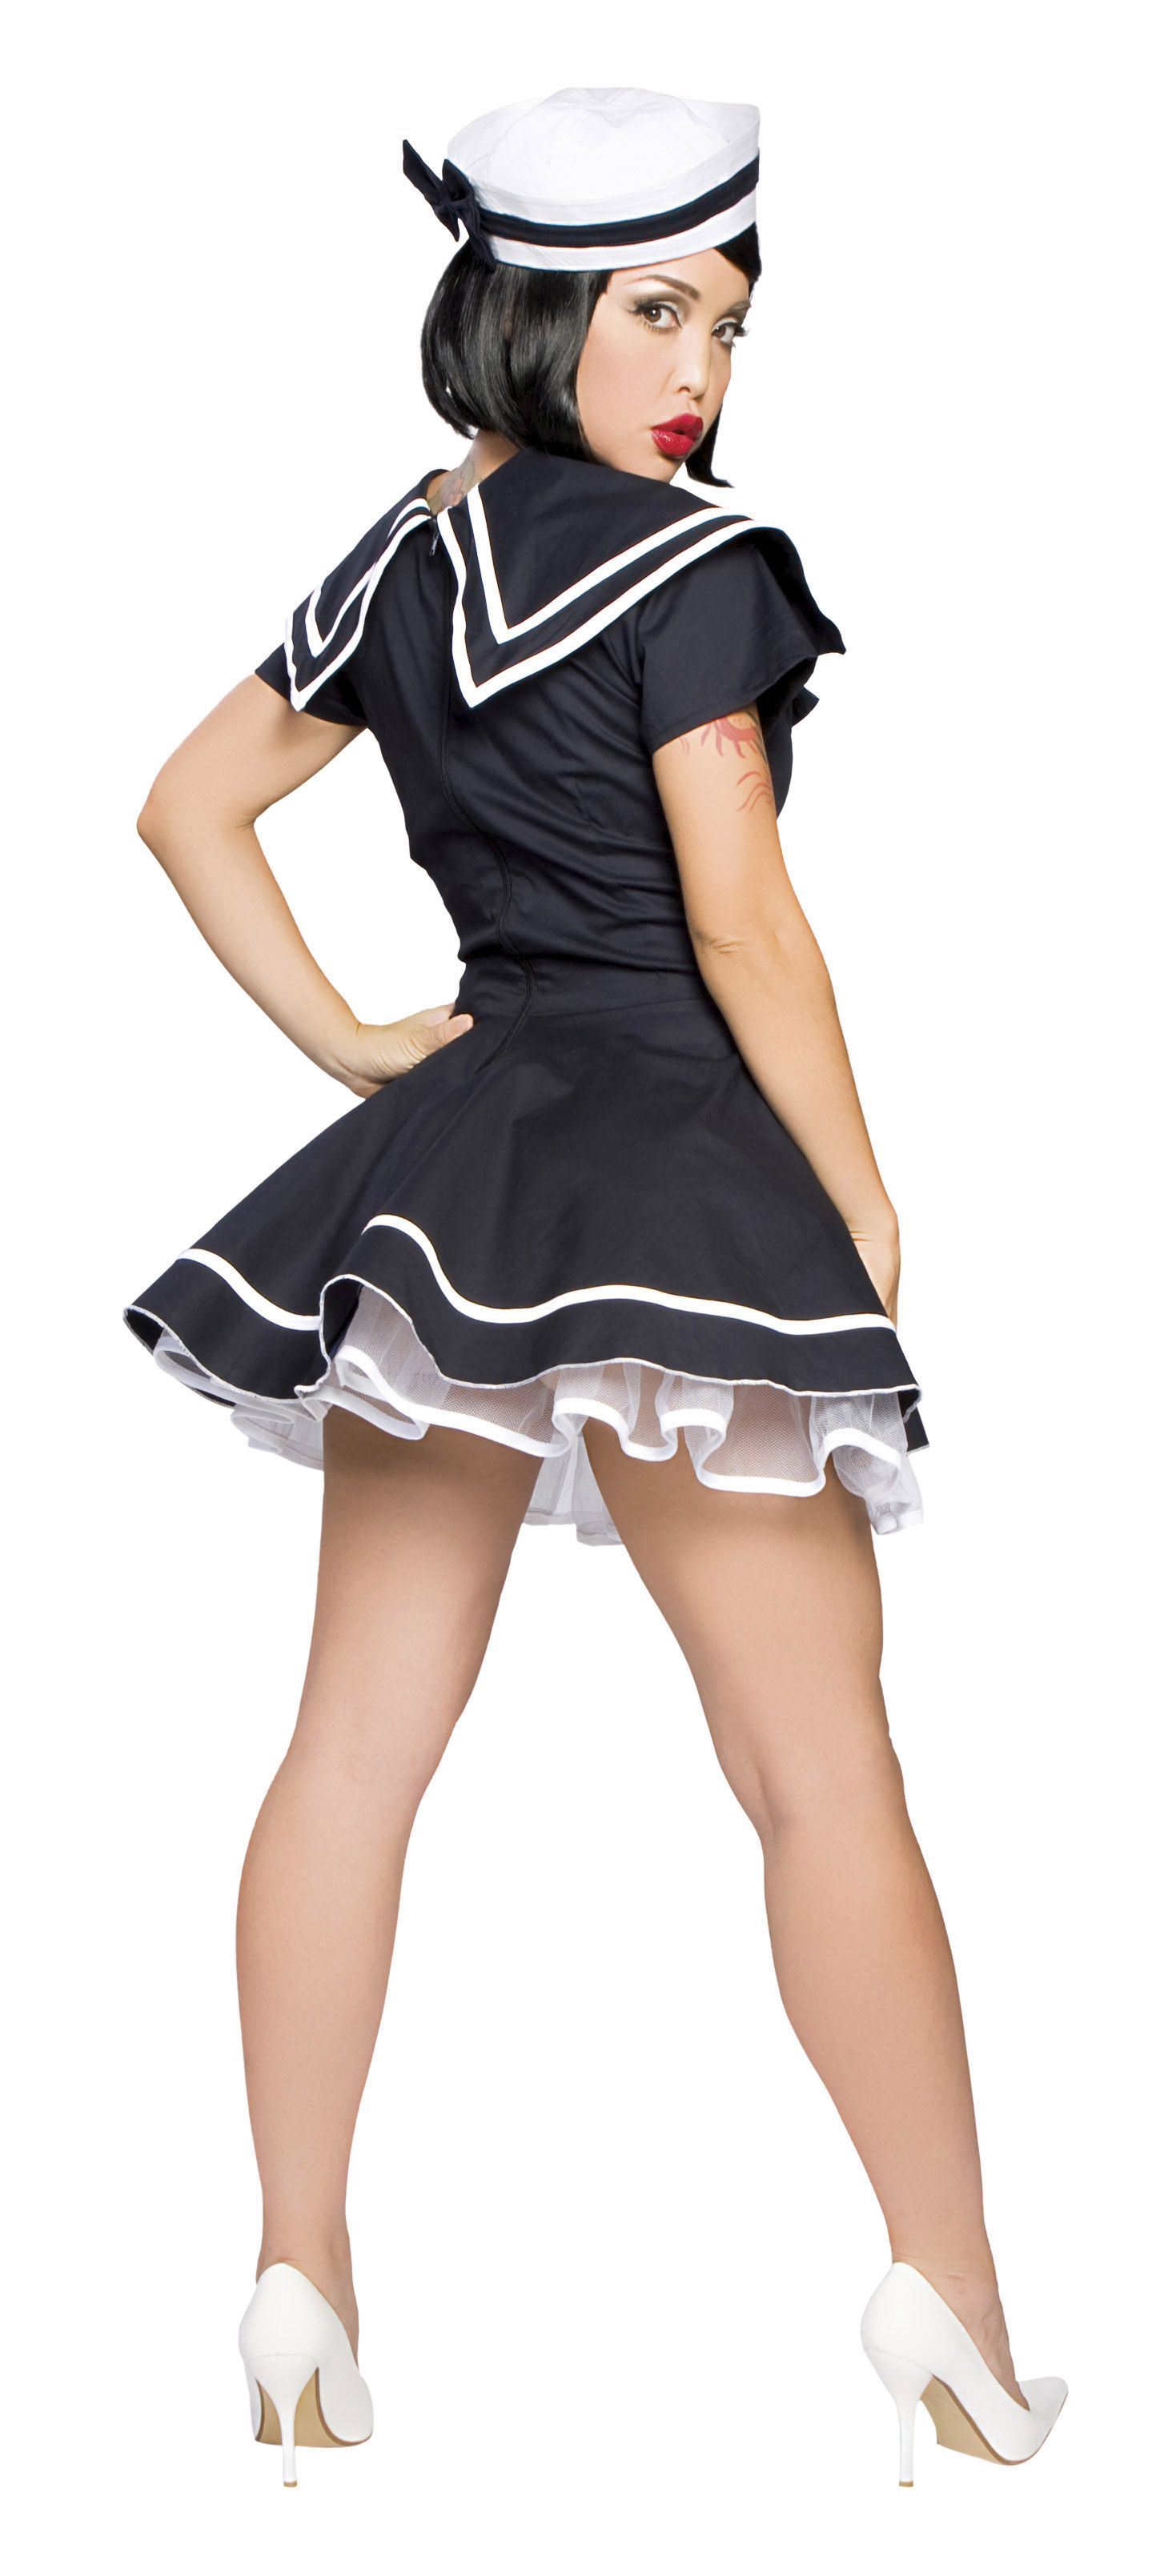 Adult Pinup Captain Women Sailor Costume 5899 The Costume Land 